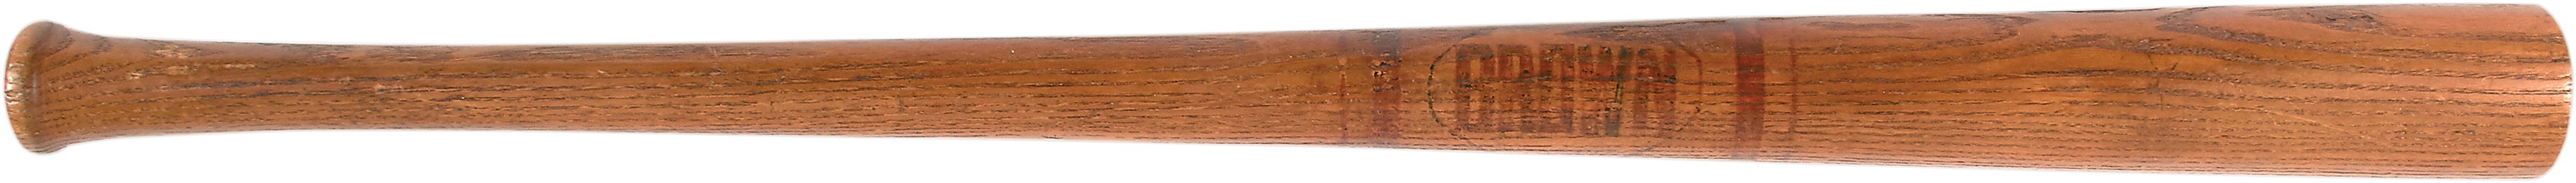 Antique Sporting Goods - 1890s Stenciled Baseball Bat by "Brown"